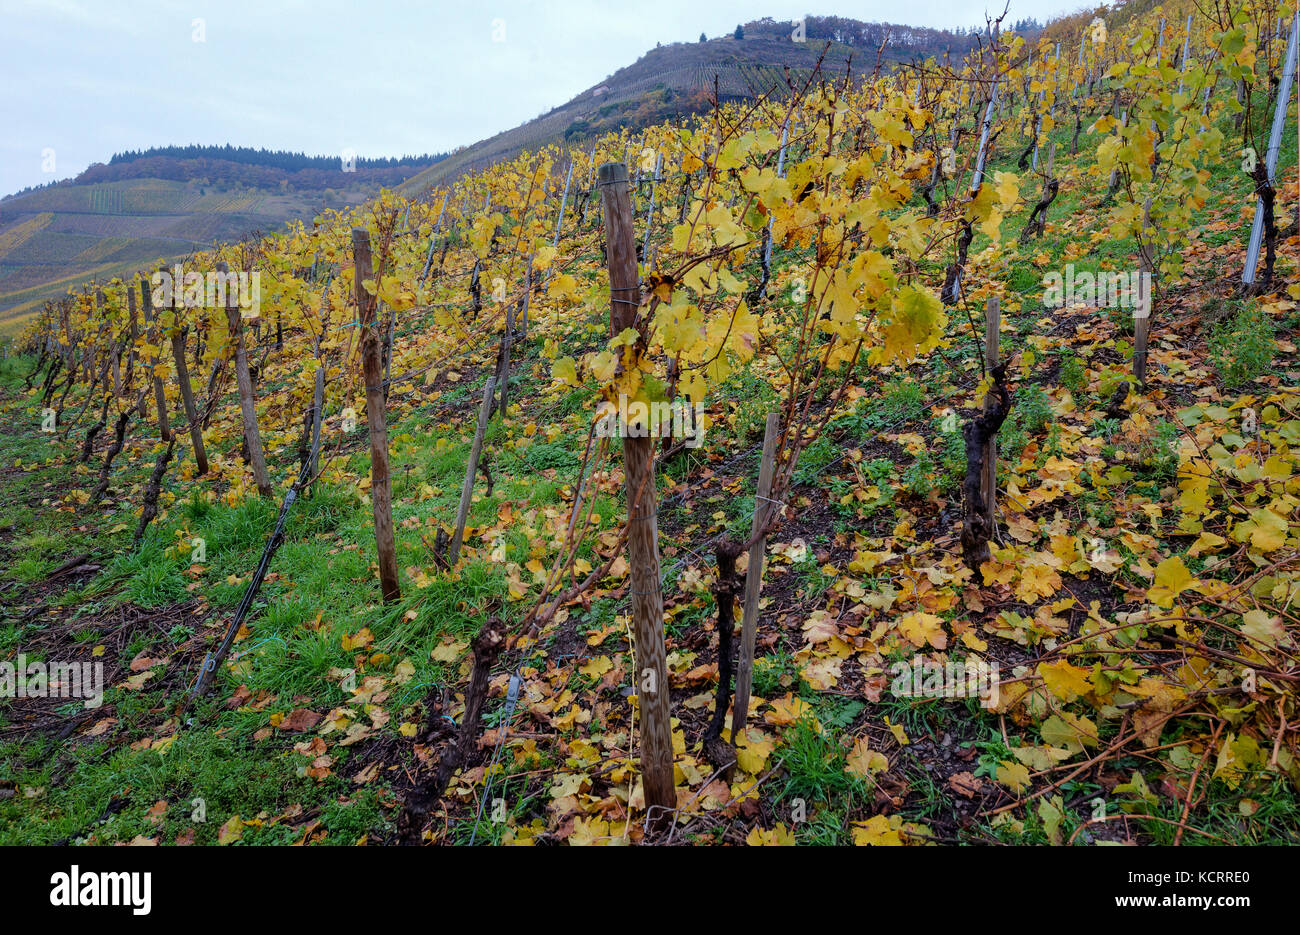 German wine industry: old vines at Maximiner Herrenberg, Longuich, Mosel, Germany Stock Photo